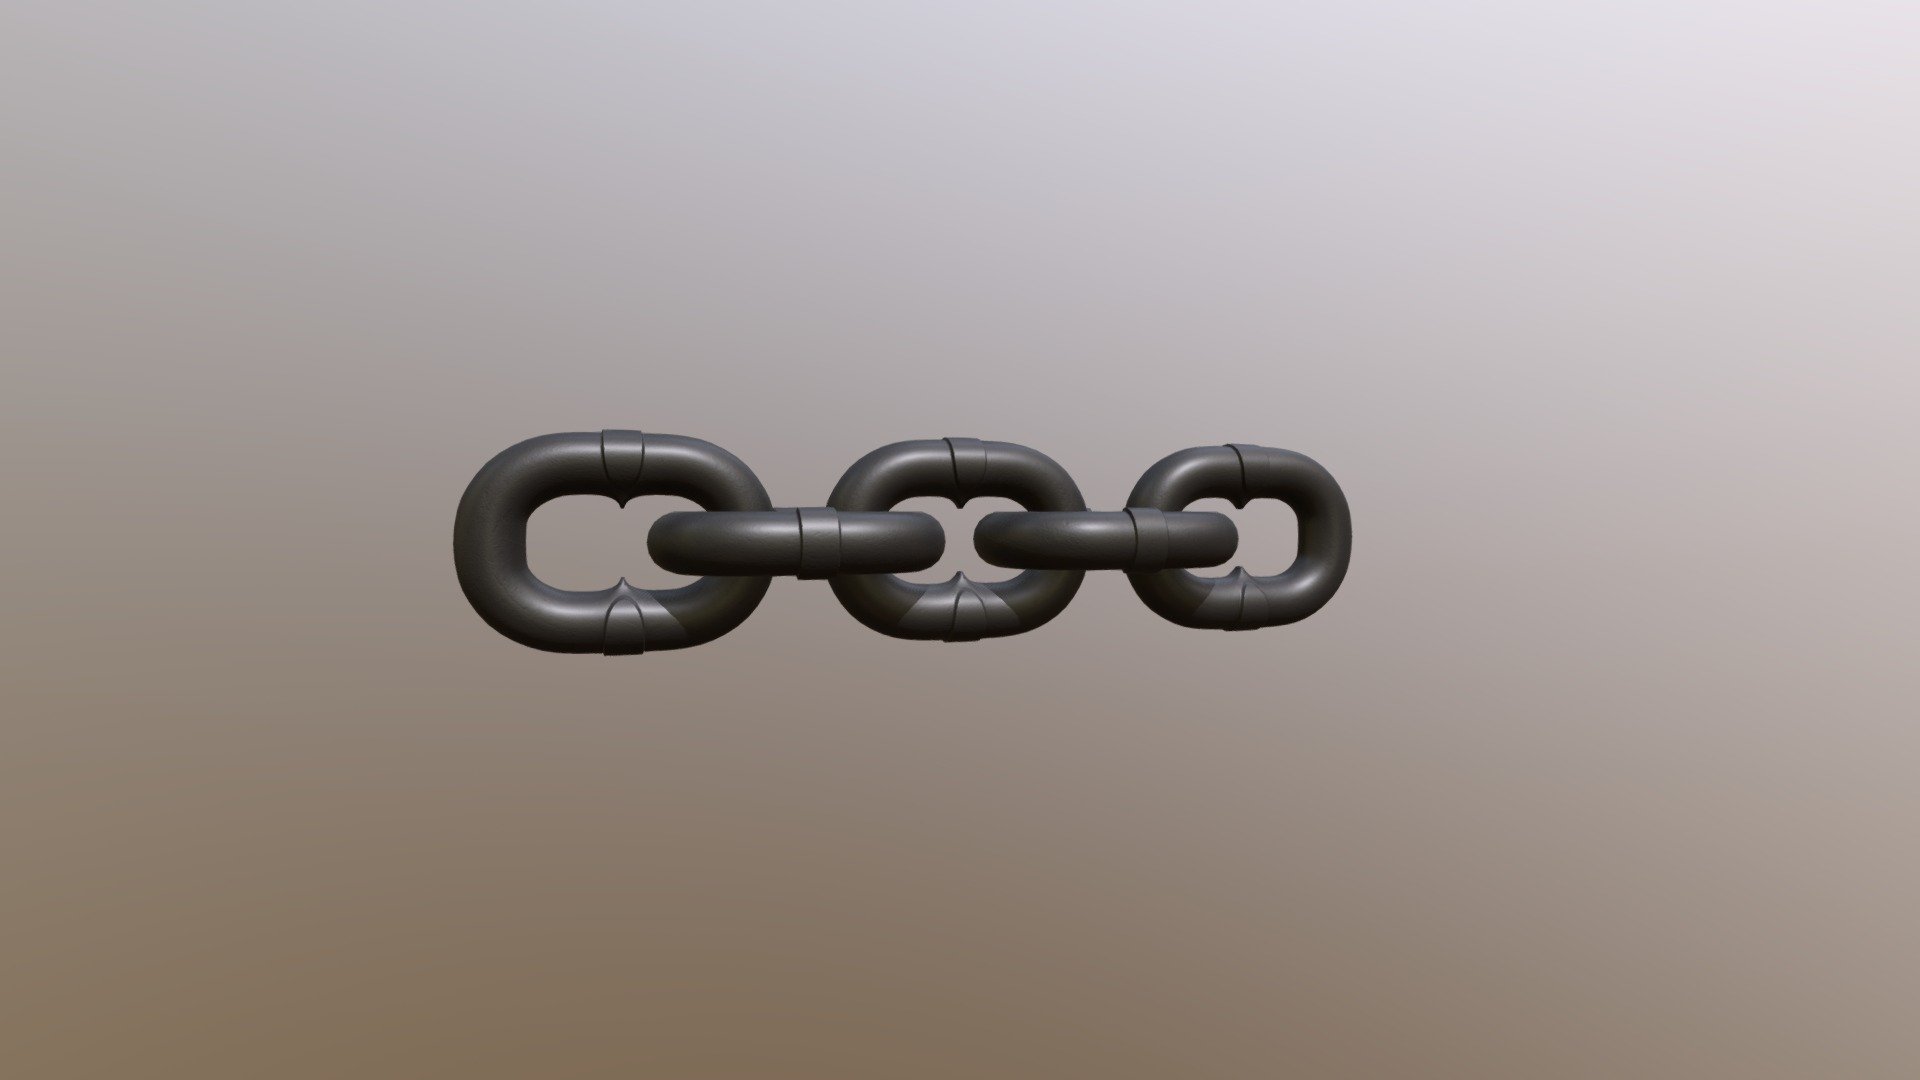 Just simple chain links to duplicate and fill you scenes with. 
Feel free to use and have fun 3d model